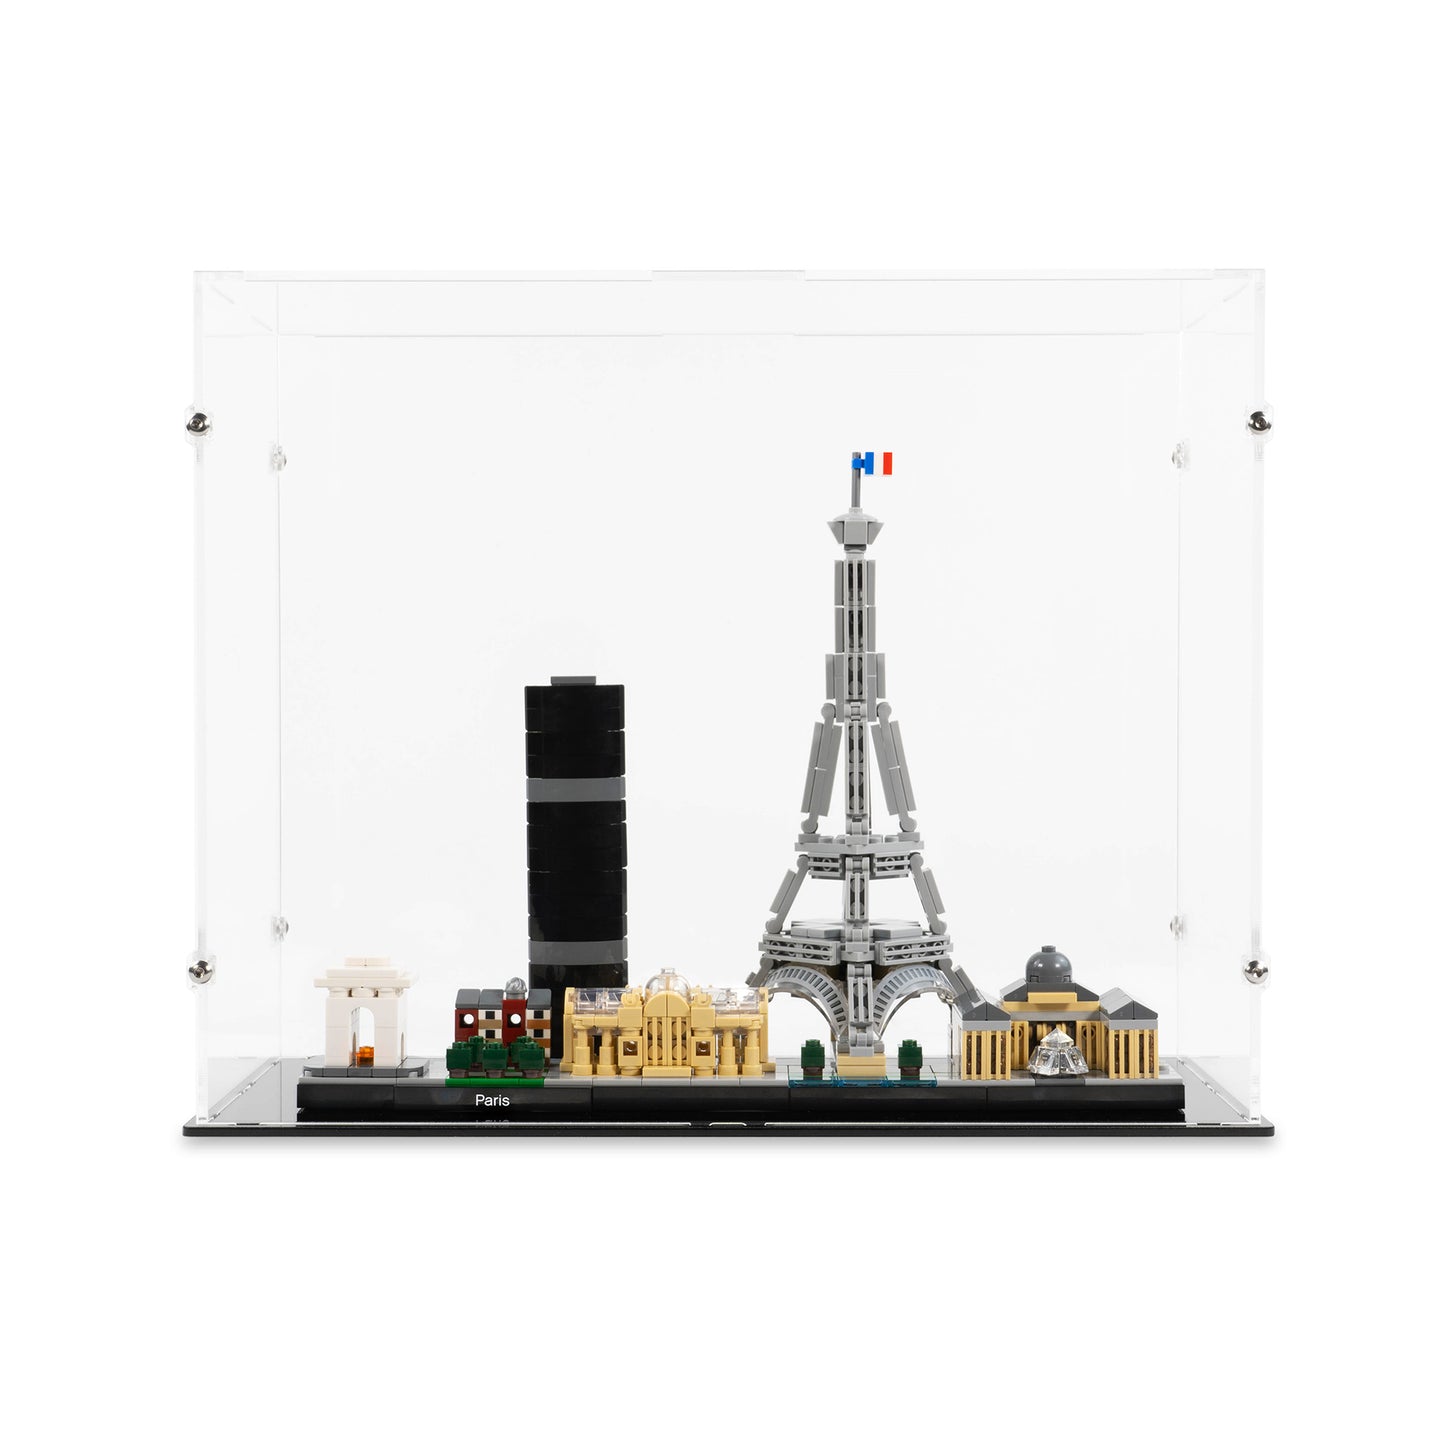 Front view of LEGO 21044 Paris Display Case.